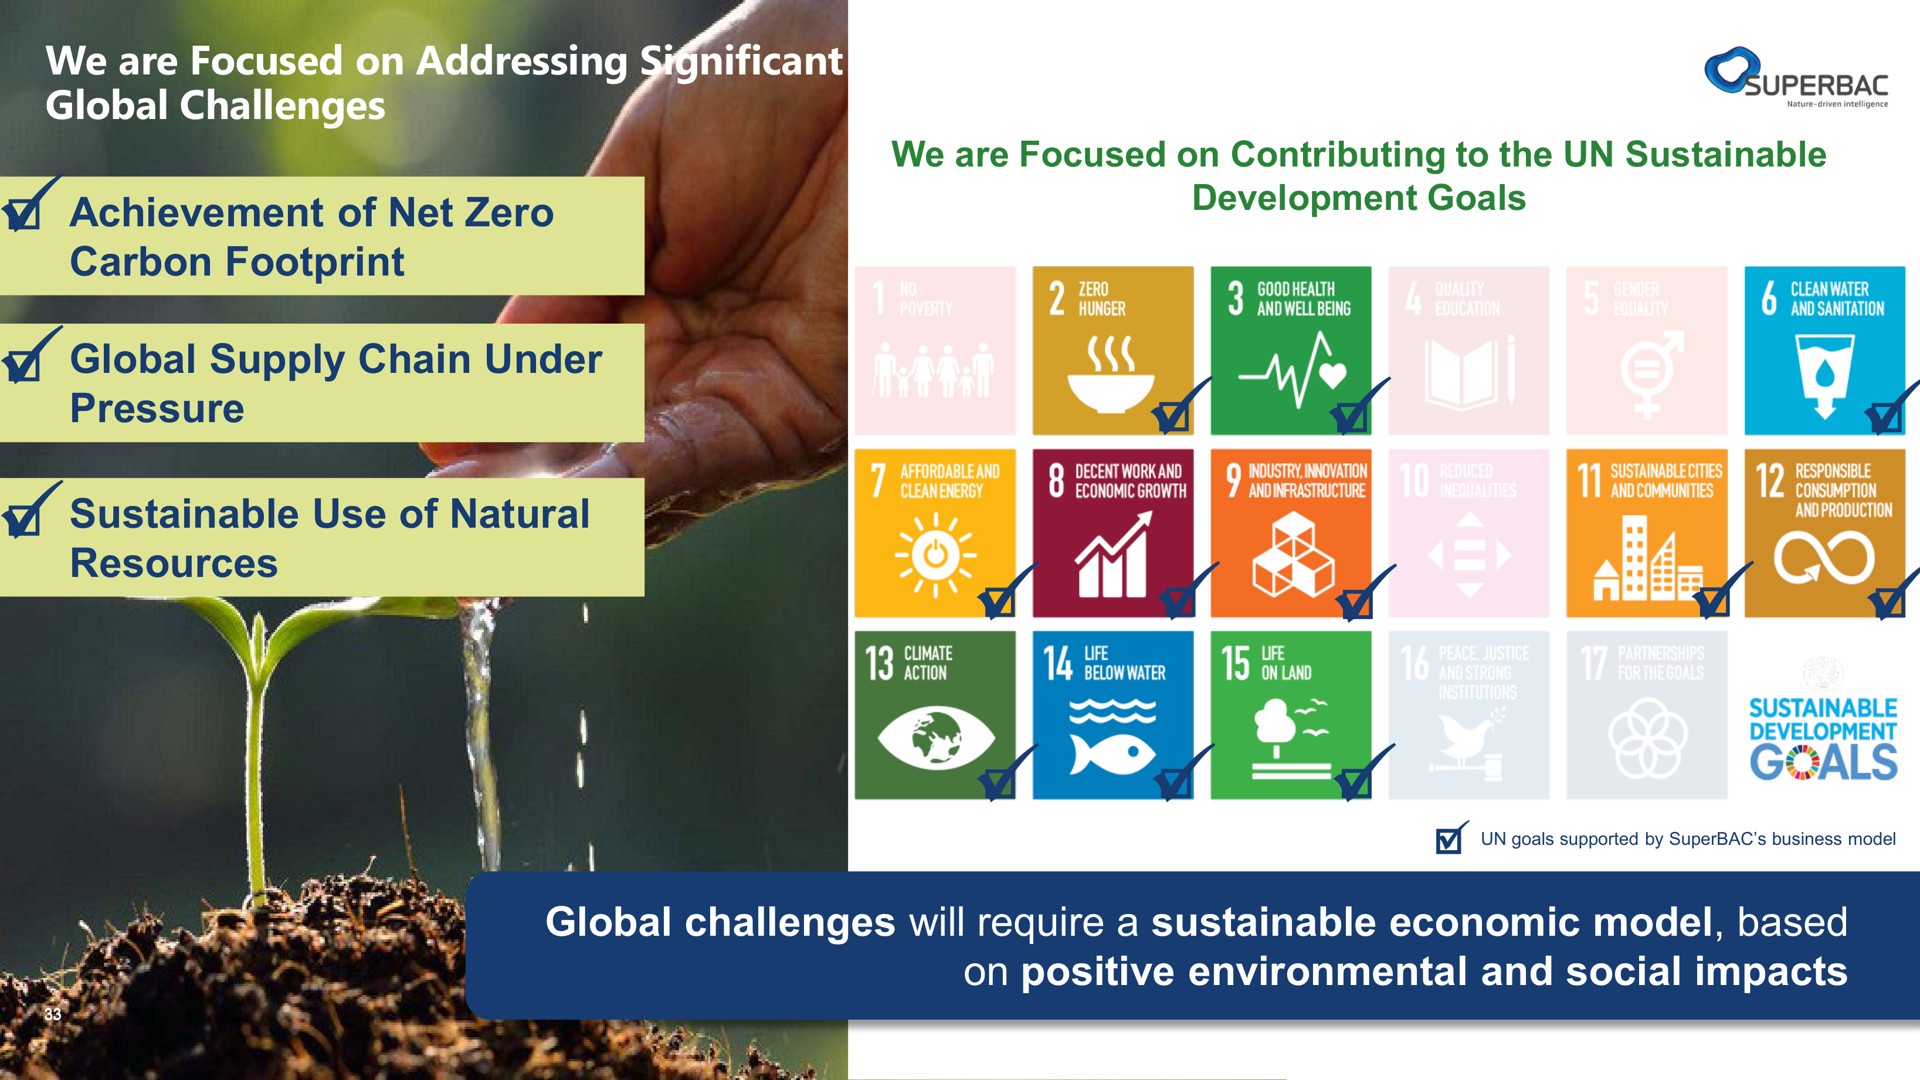 we are focused on addressing significant global challenges achievement of net zero carbon footprint global supply chain under pressure sustainable use of natural resources we are focused on contributing to the sustainable development goals global challenges will require a sustainable economic model based on positive environmental and social impacts i i | Superbac